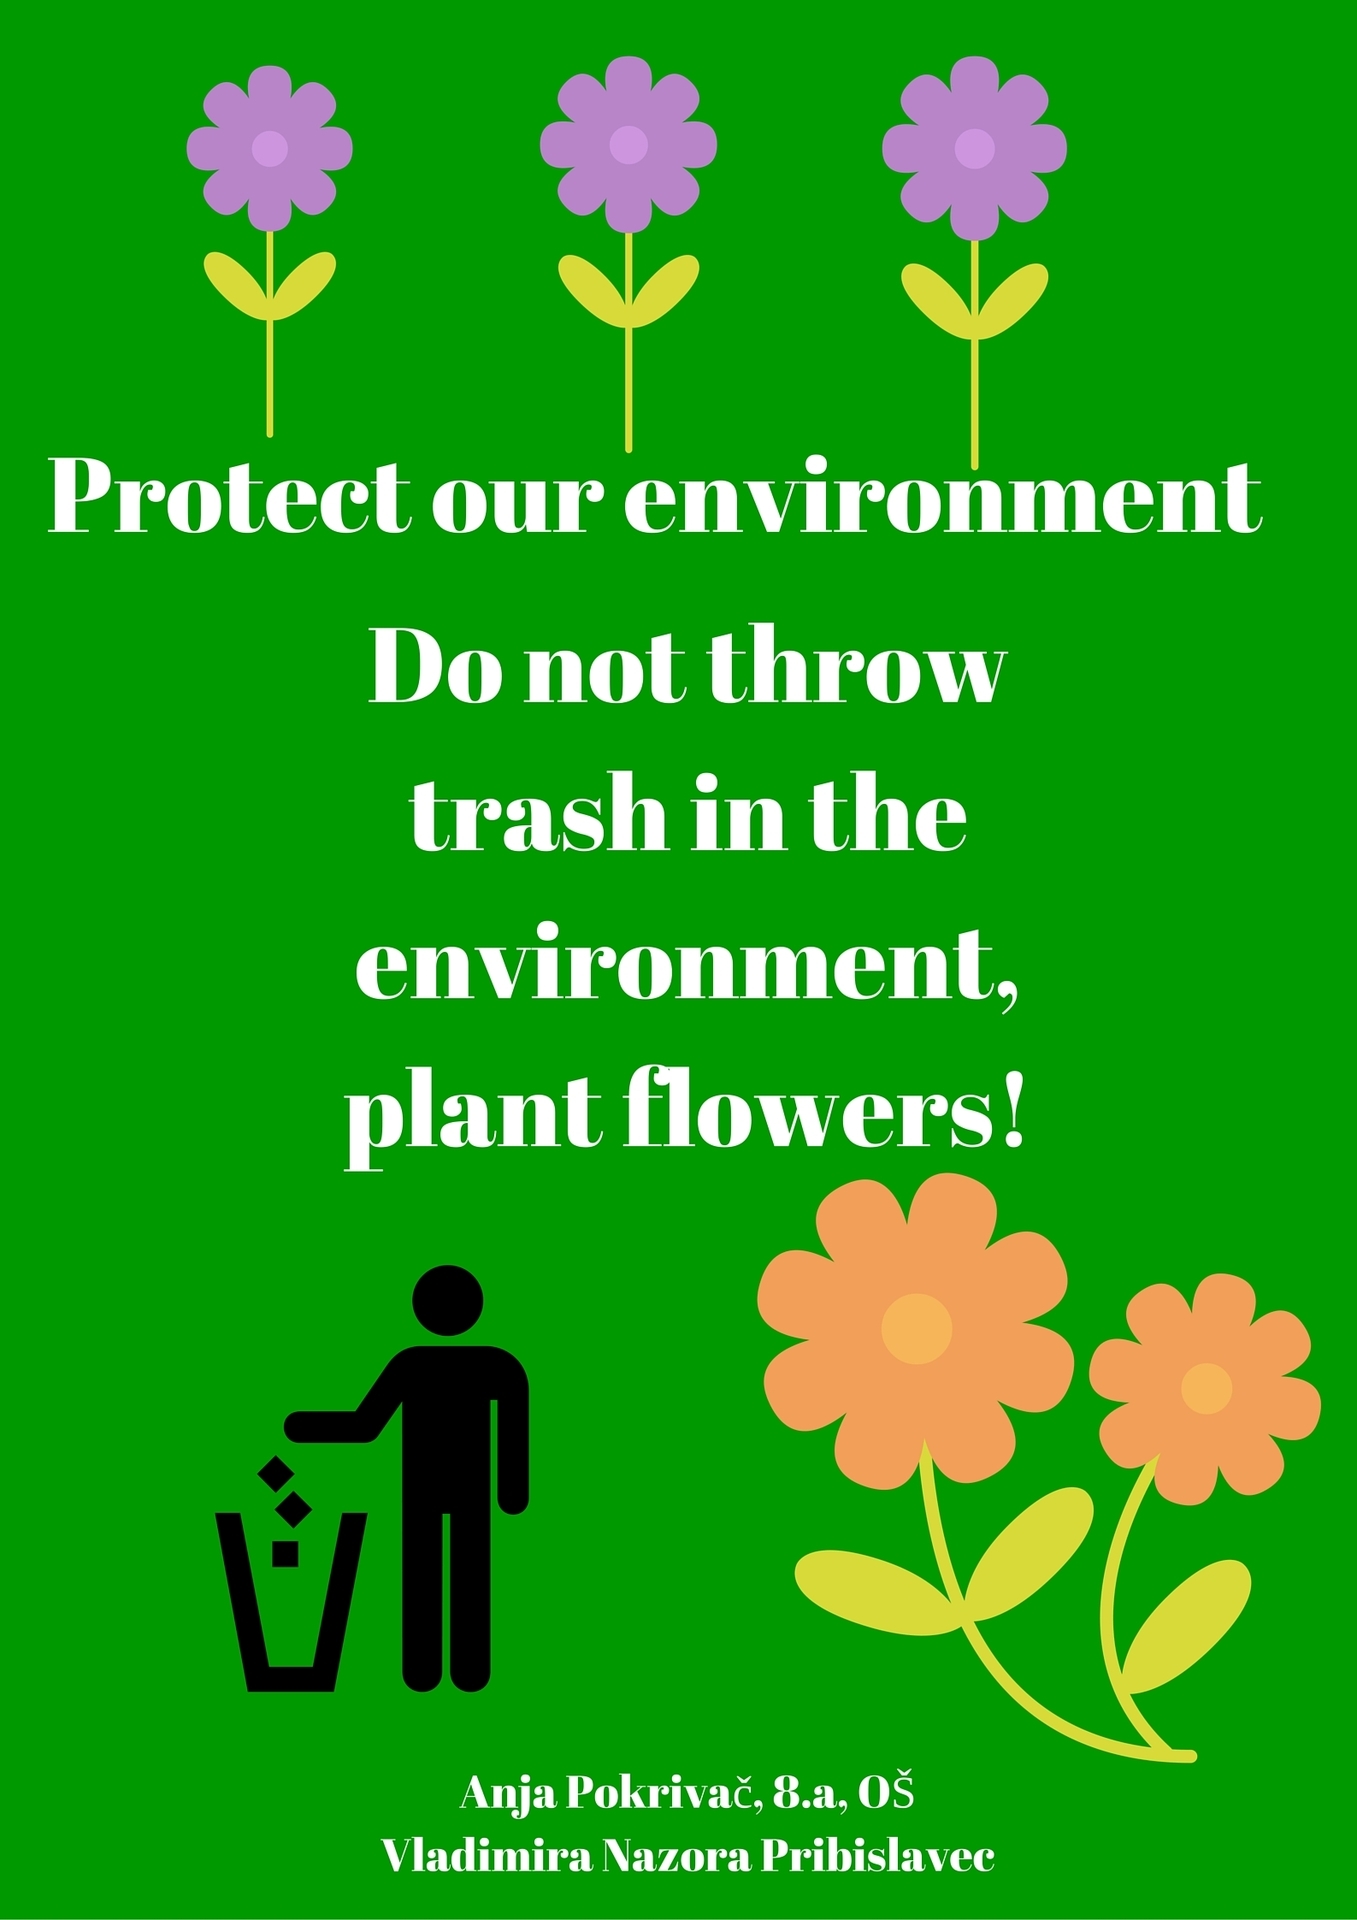 eTwinning project Where is my green environment? - Canva poster